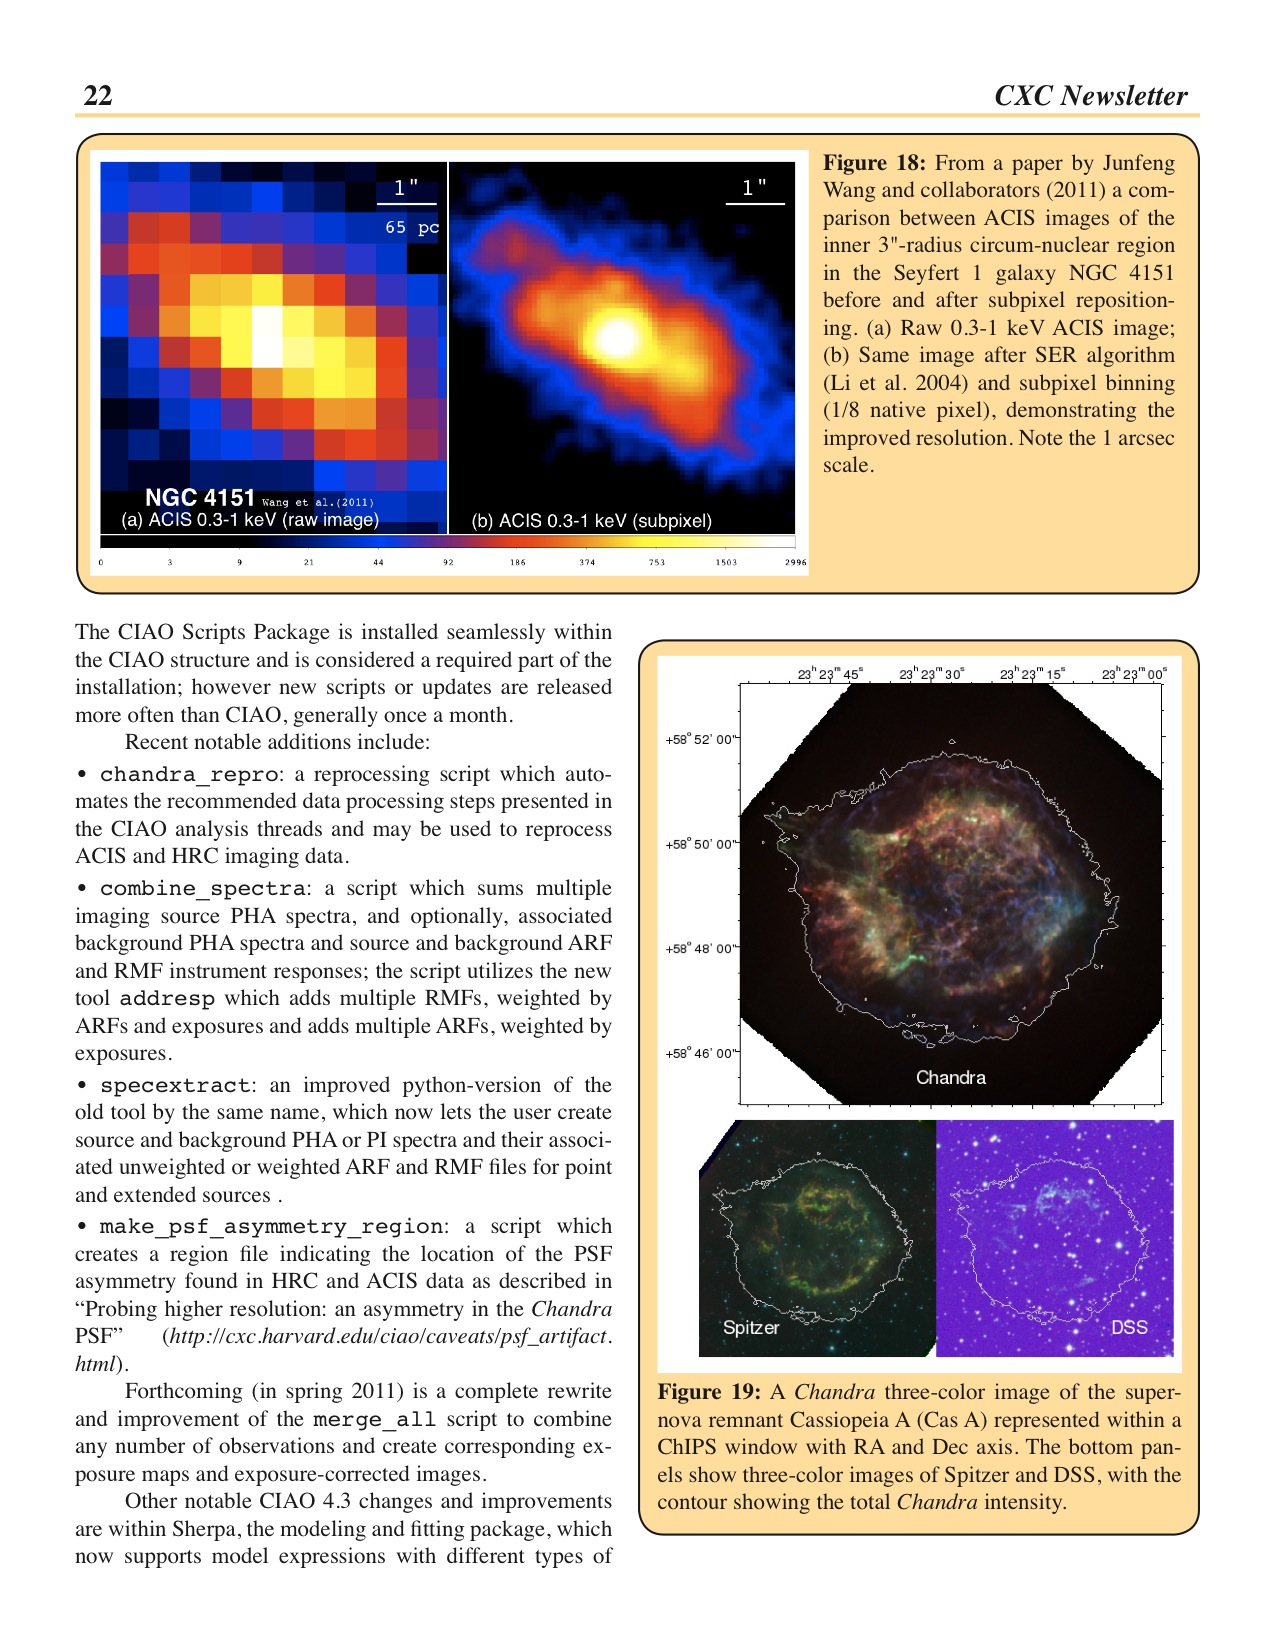 Page 22 of the Chandra Newsletter, issue 18.